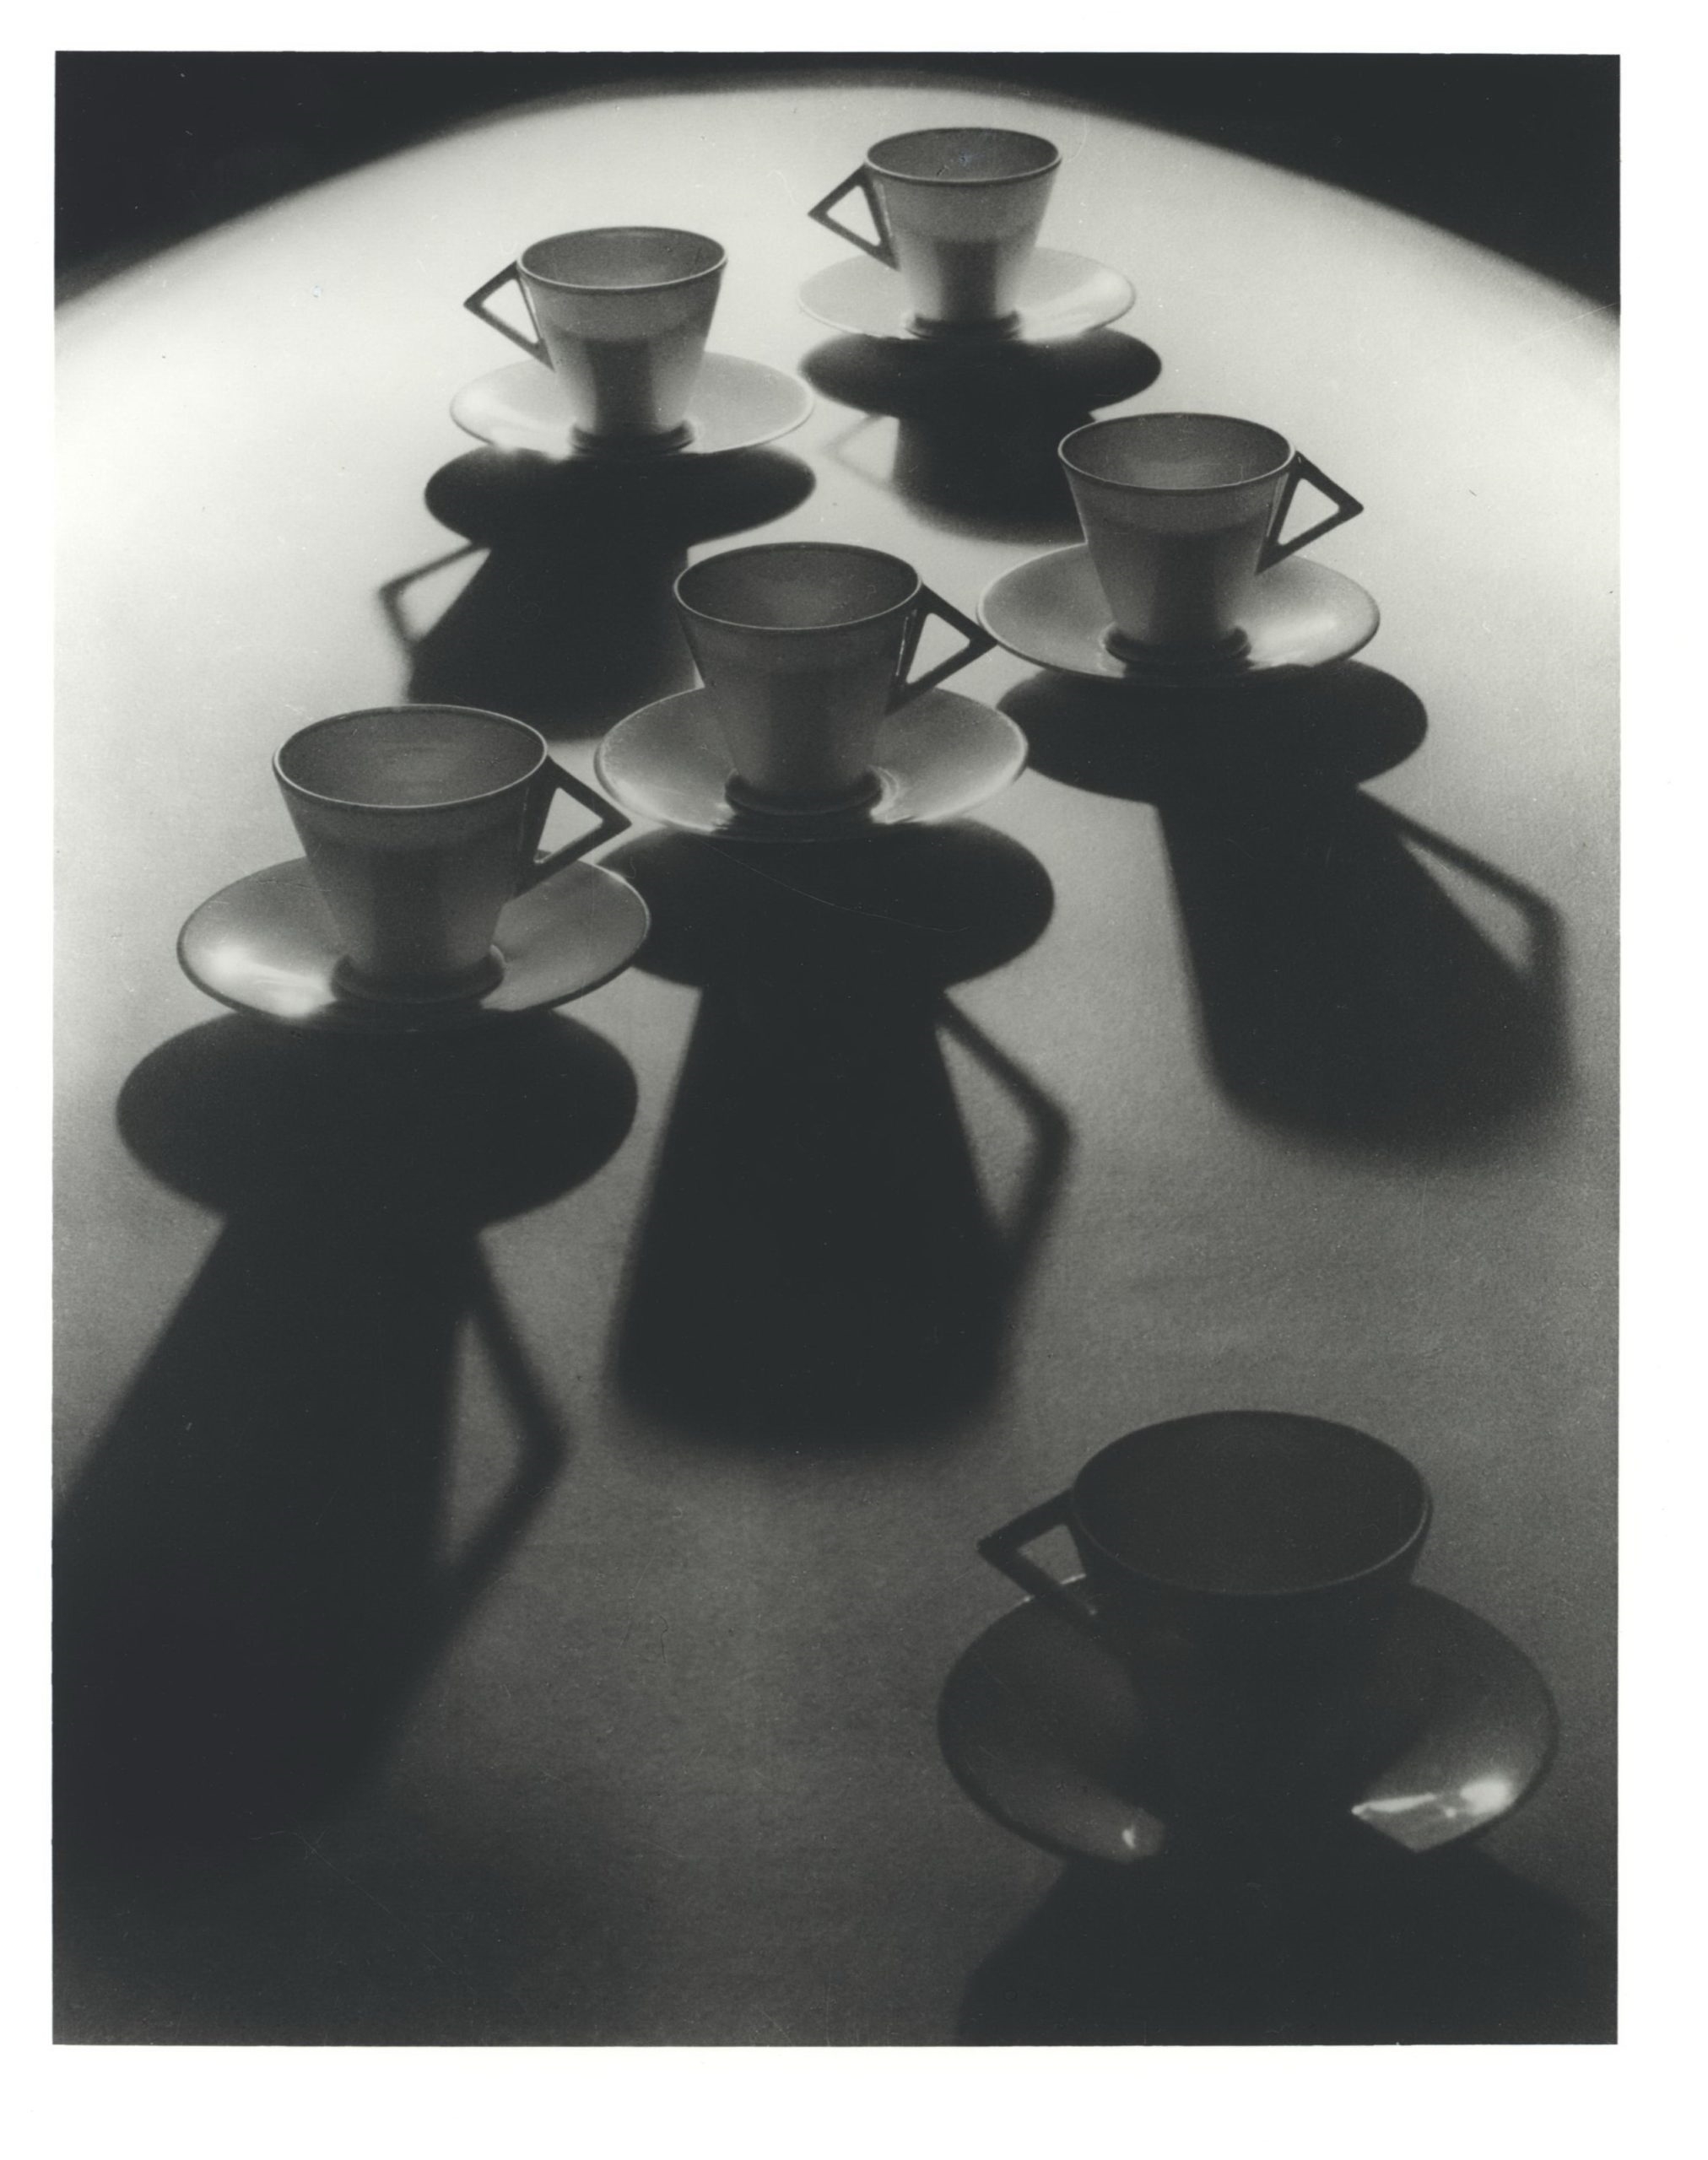 Teacup Ballet by Olive Cotton, 1935